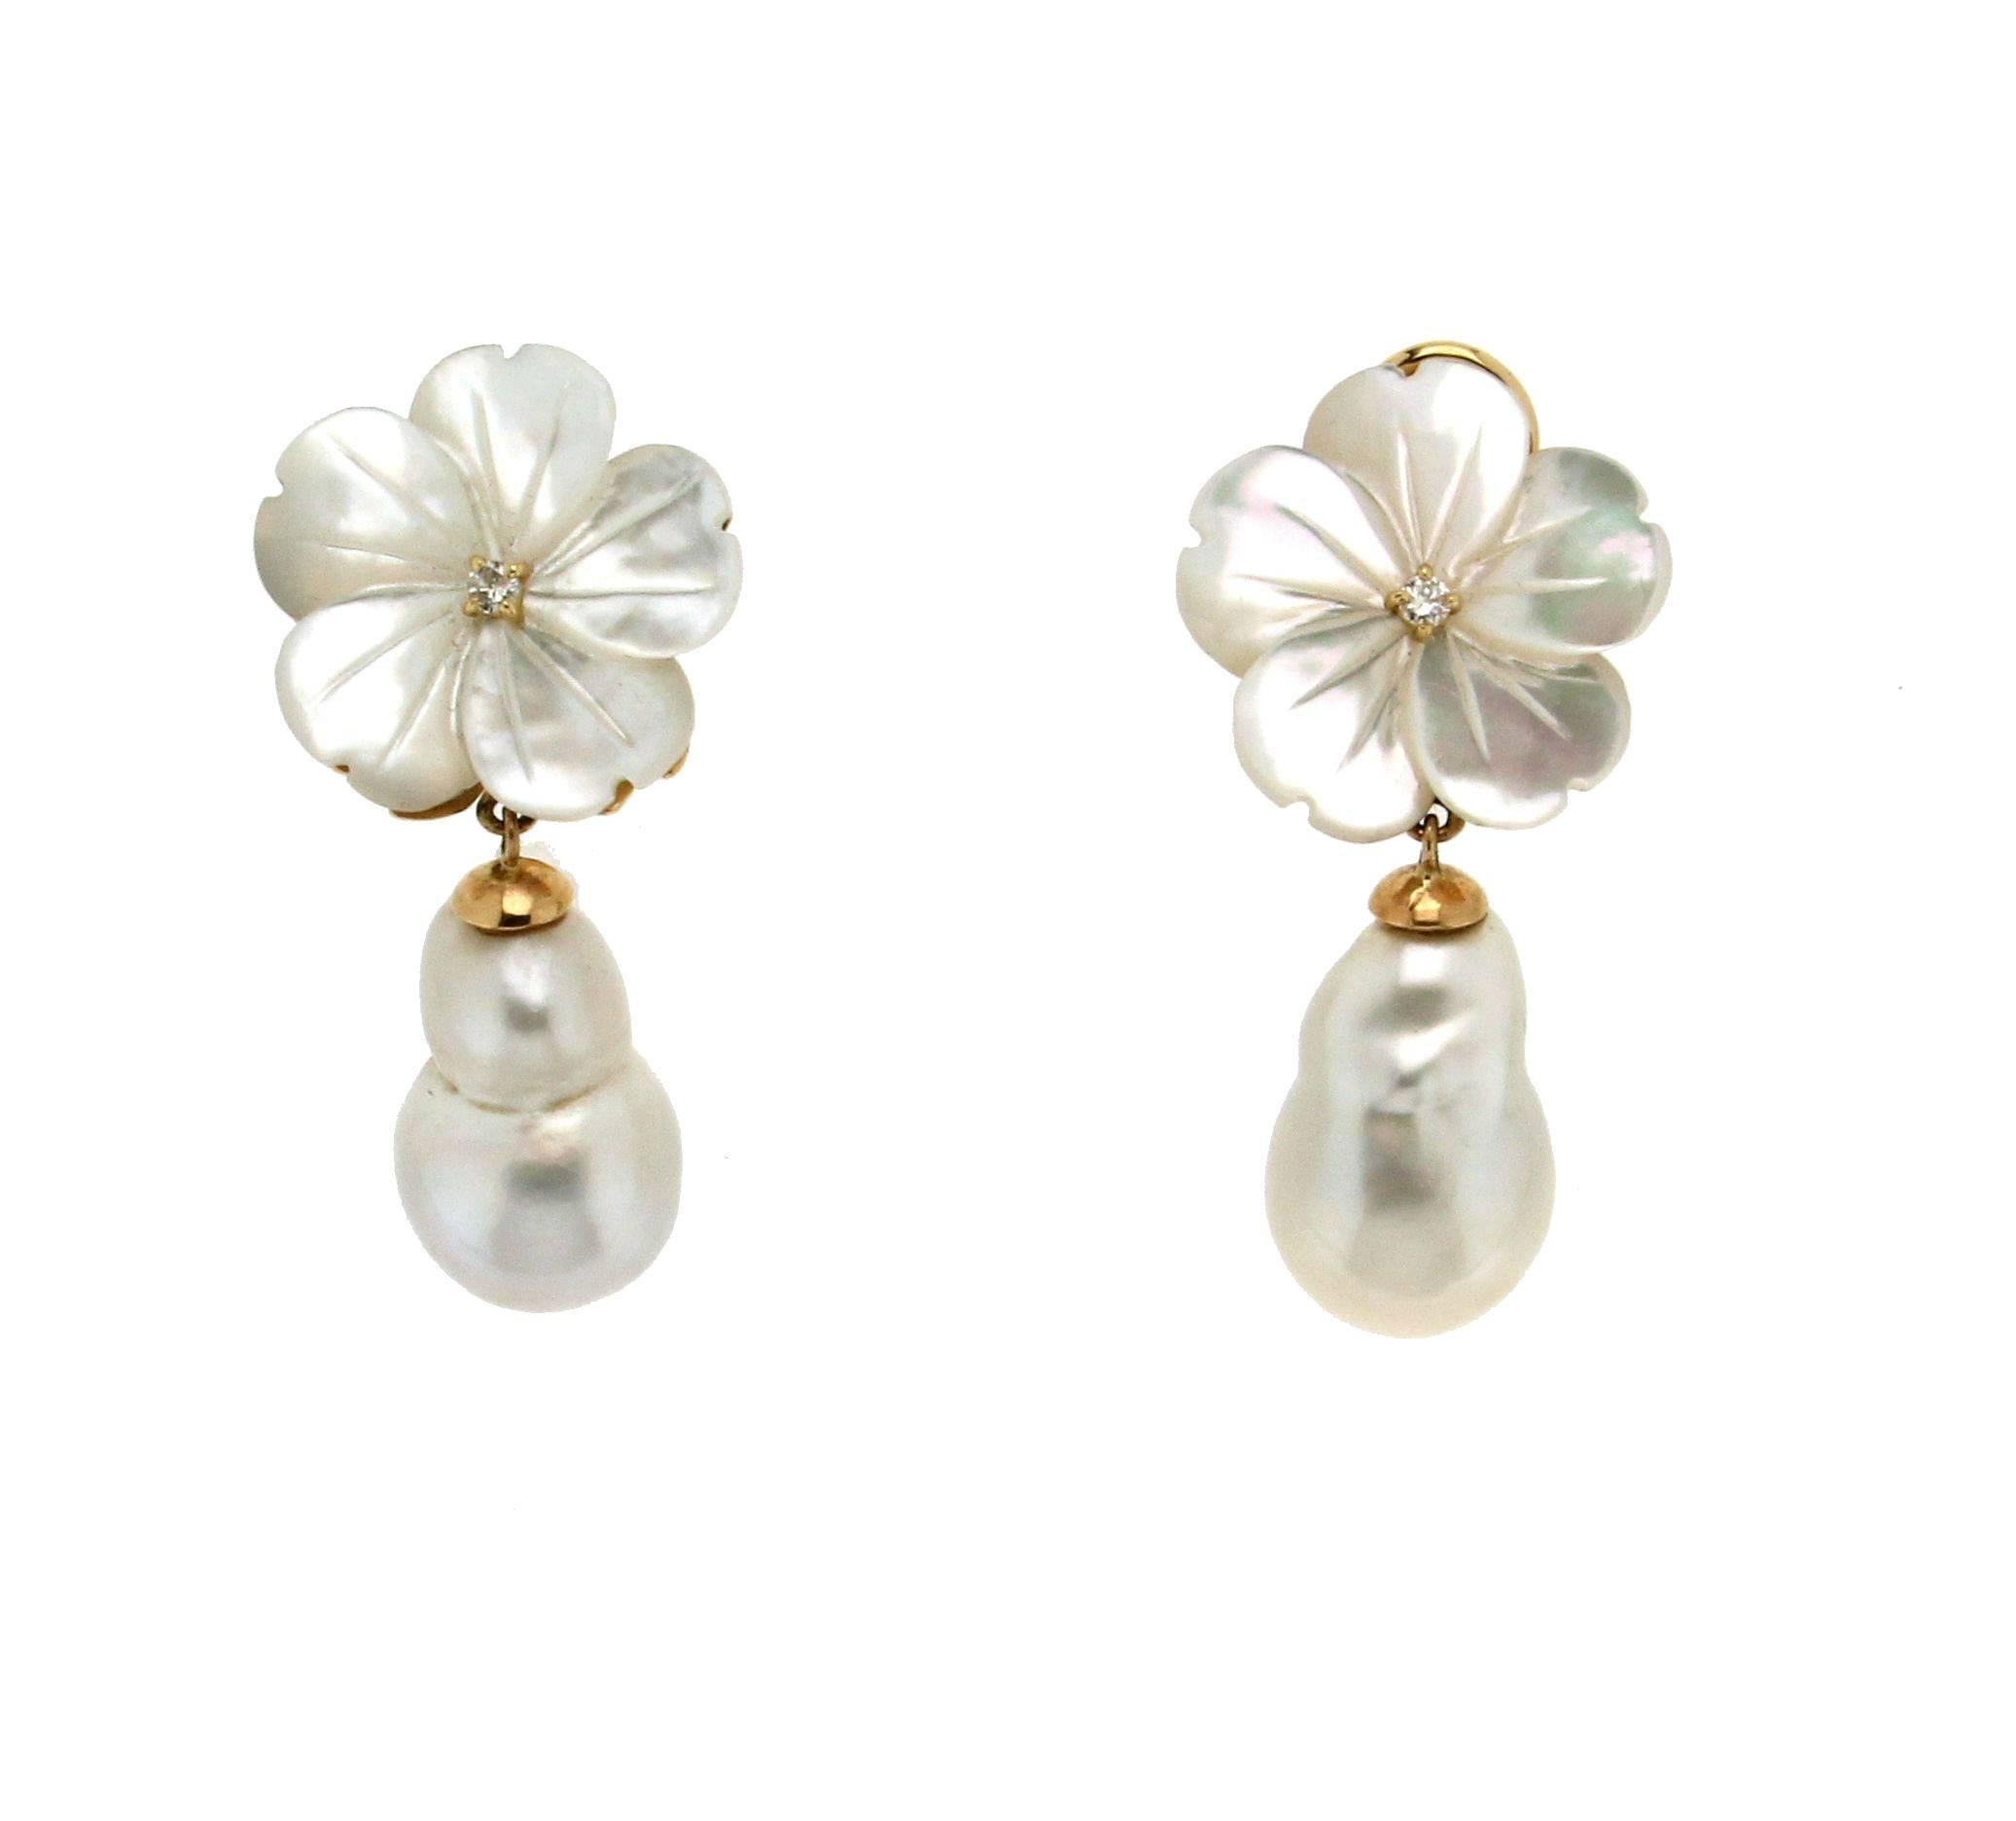 This lovely pair of mother of pearl flower earrings features white diamonds center,
The earrings are completed in 18kt yellow gold with clip backs and two pearl baroque drop.
Diamonds weight 0.10 kt
Pearls baroque weight 7 gr.